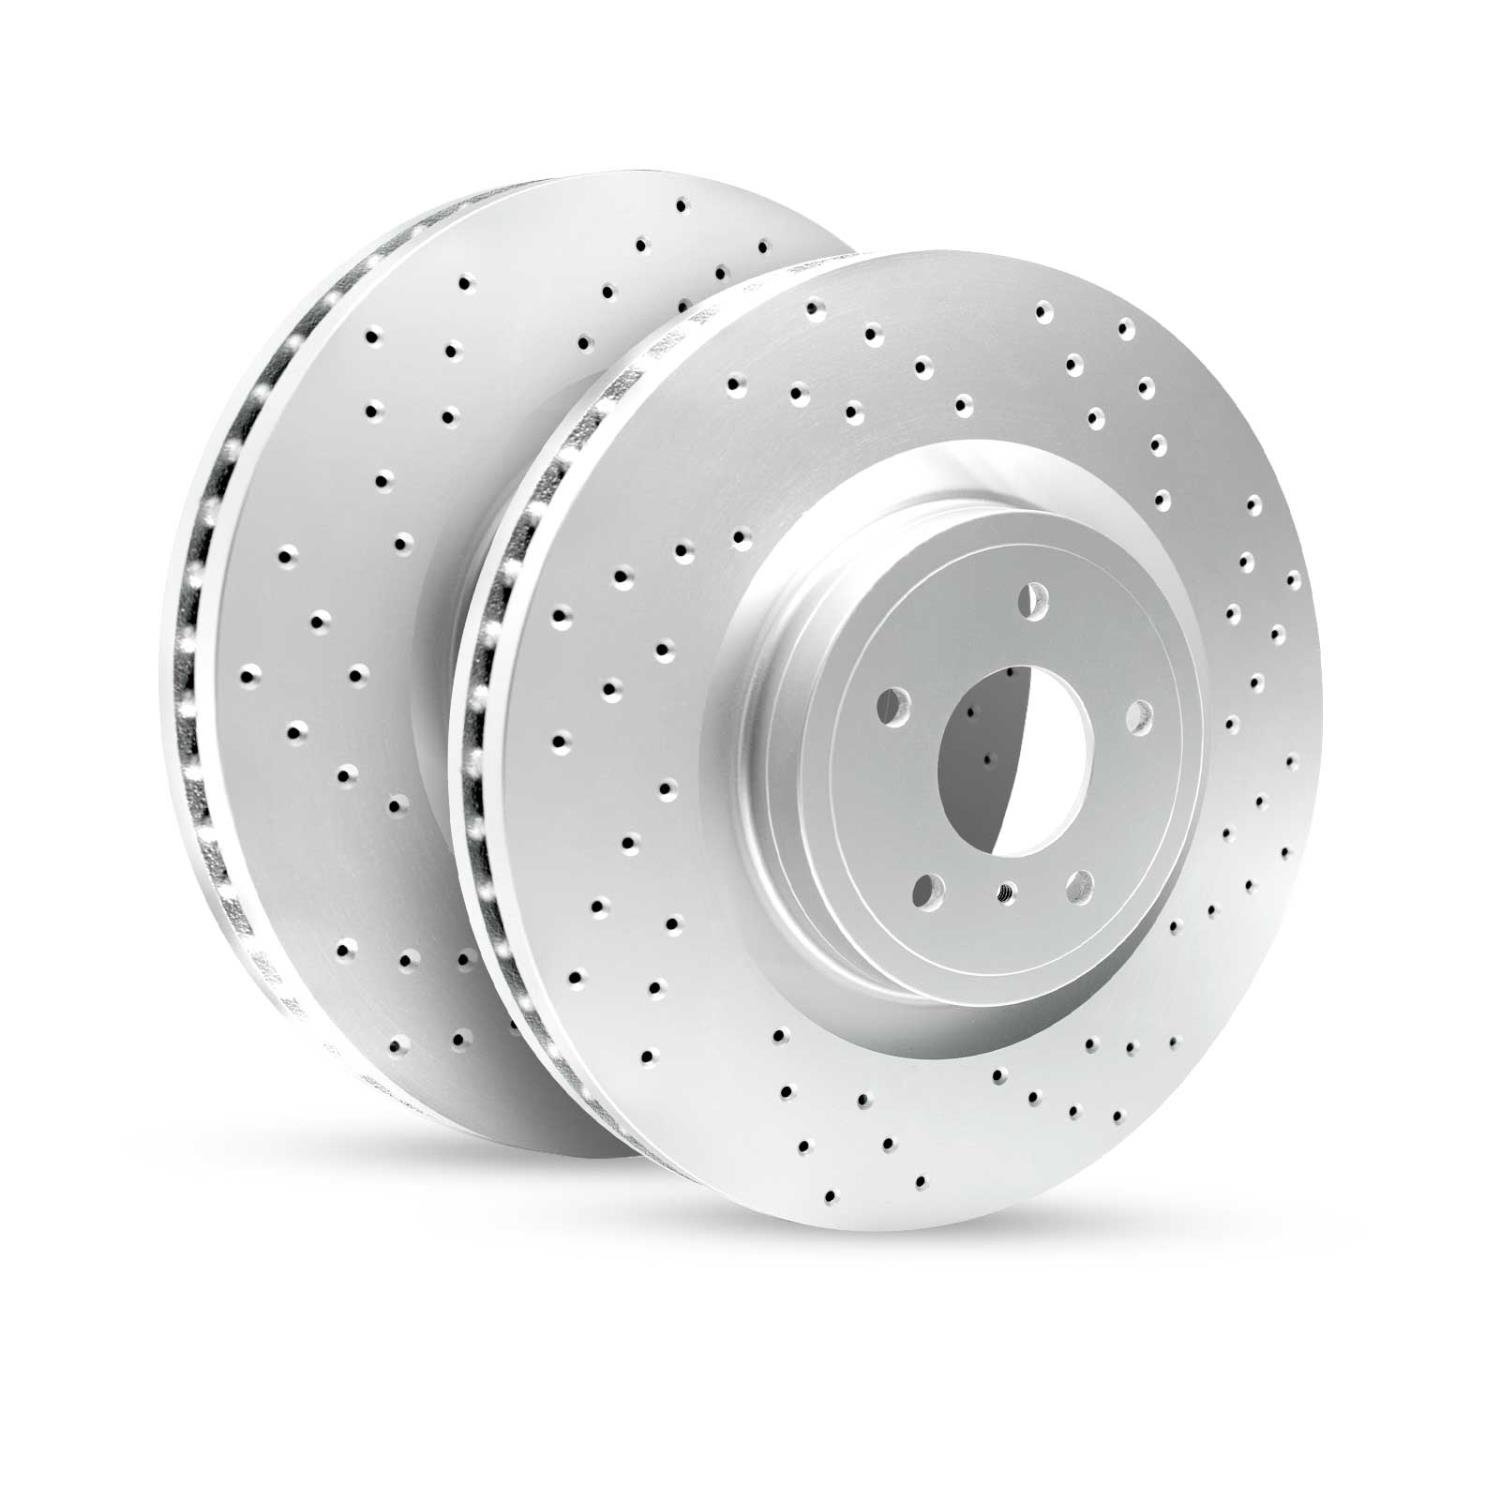 GEO-Carbon Drilled/Slotted Rotors, Fits Select Land Rover,